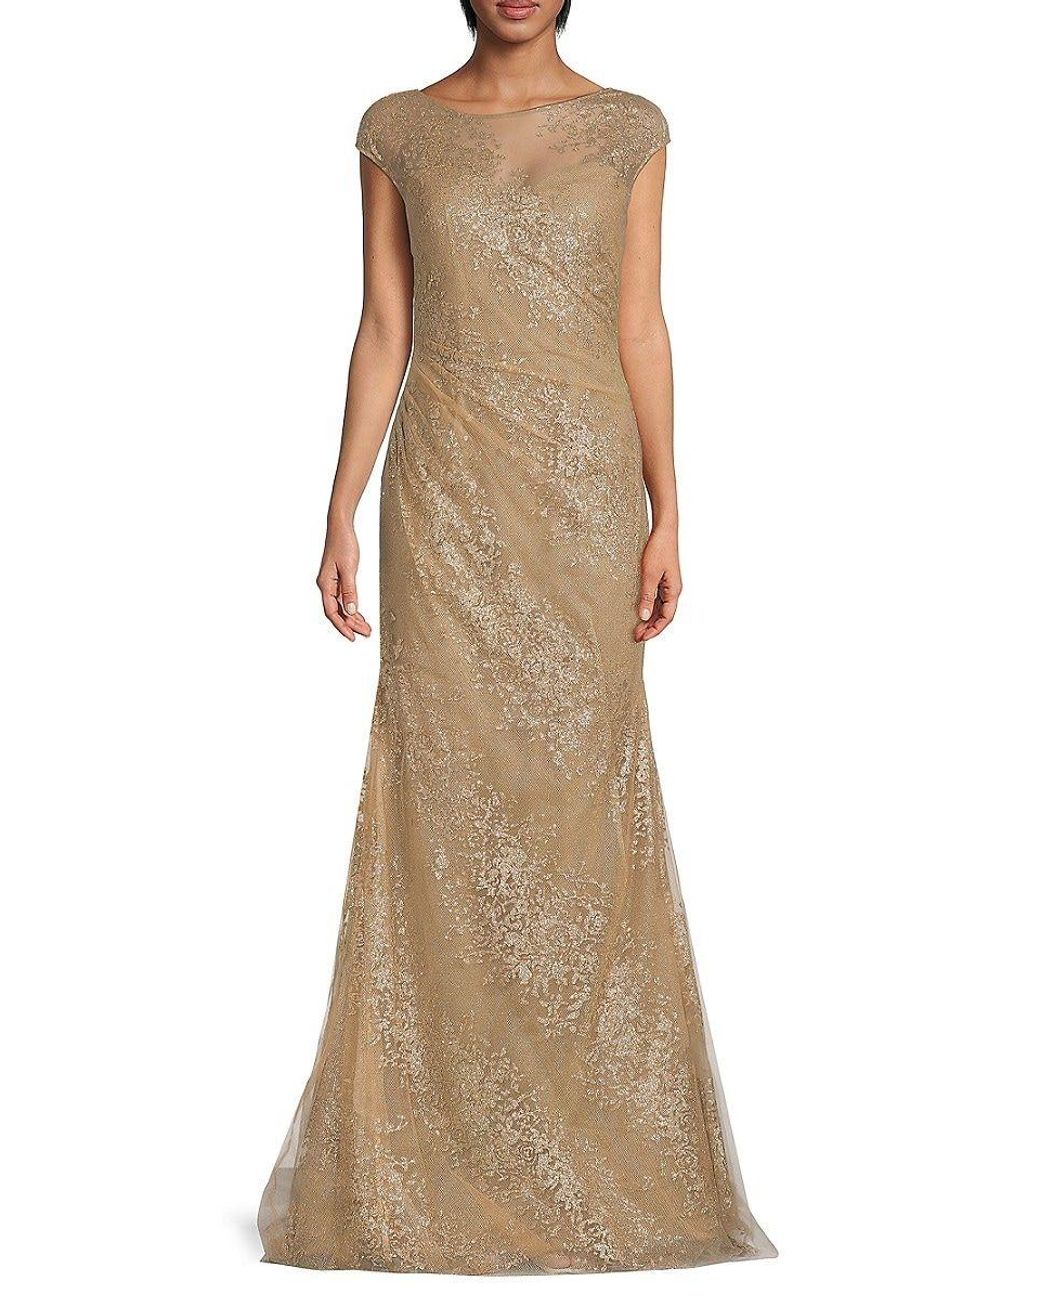 Buy Shimmer Gold Maternity Gown | Maternity Gowns Online – The Mom Store